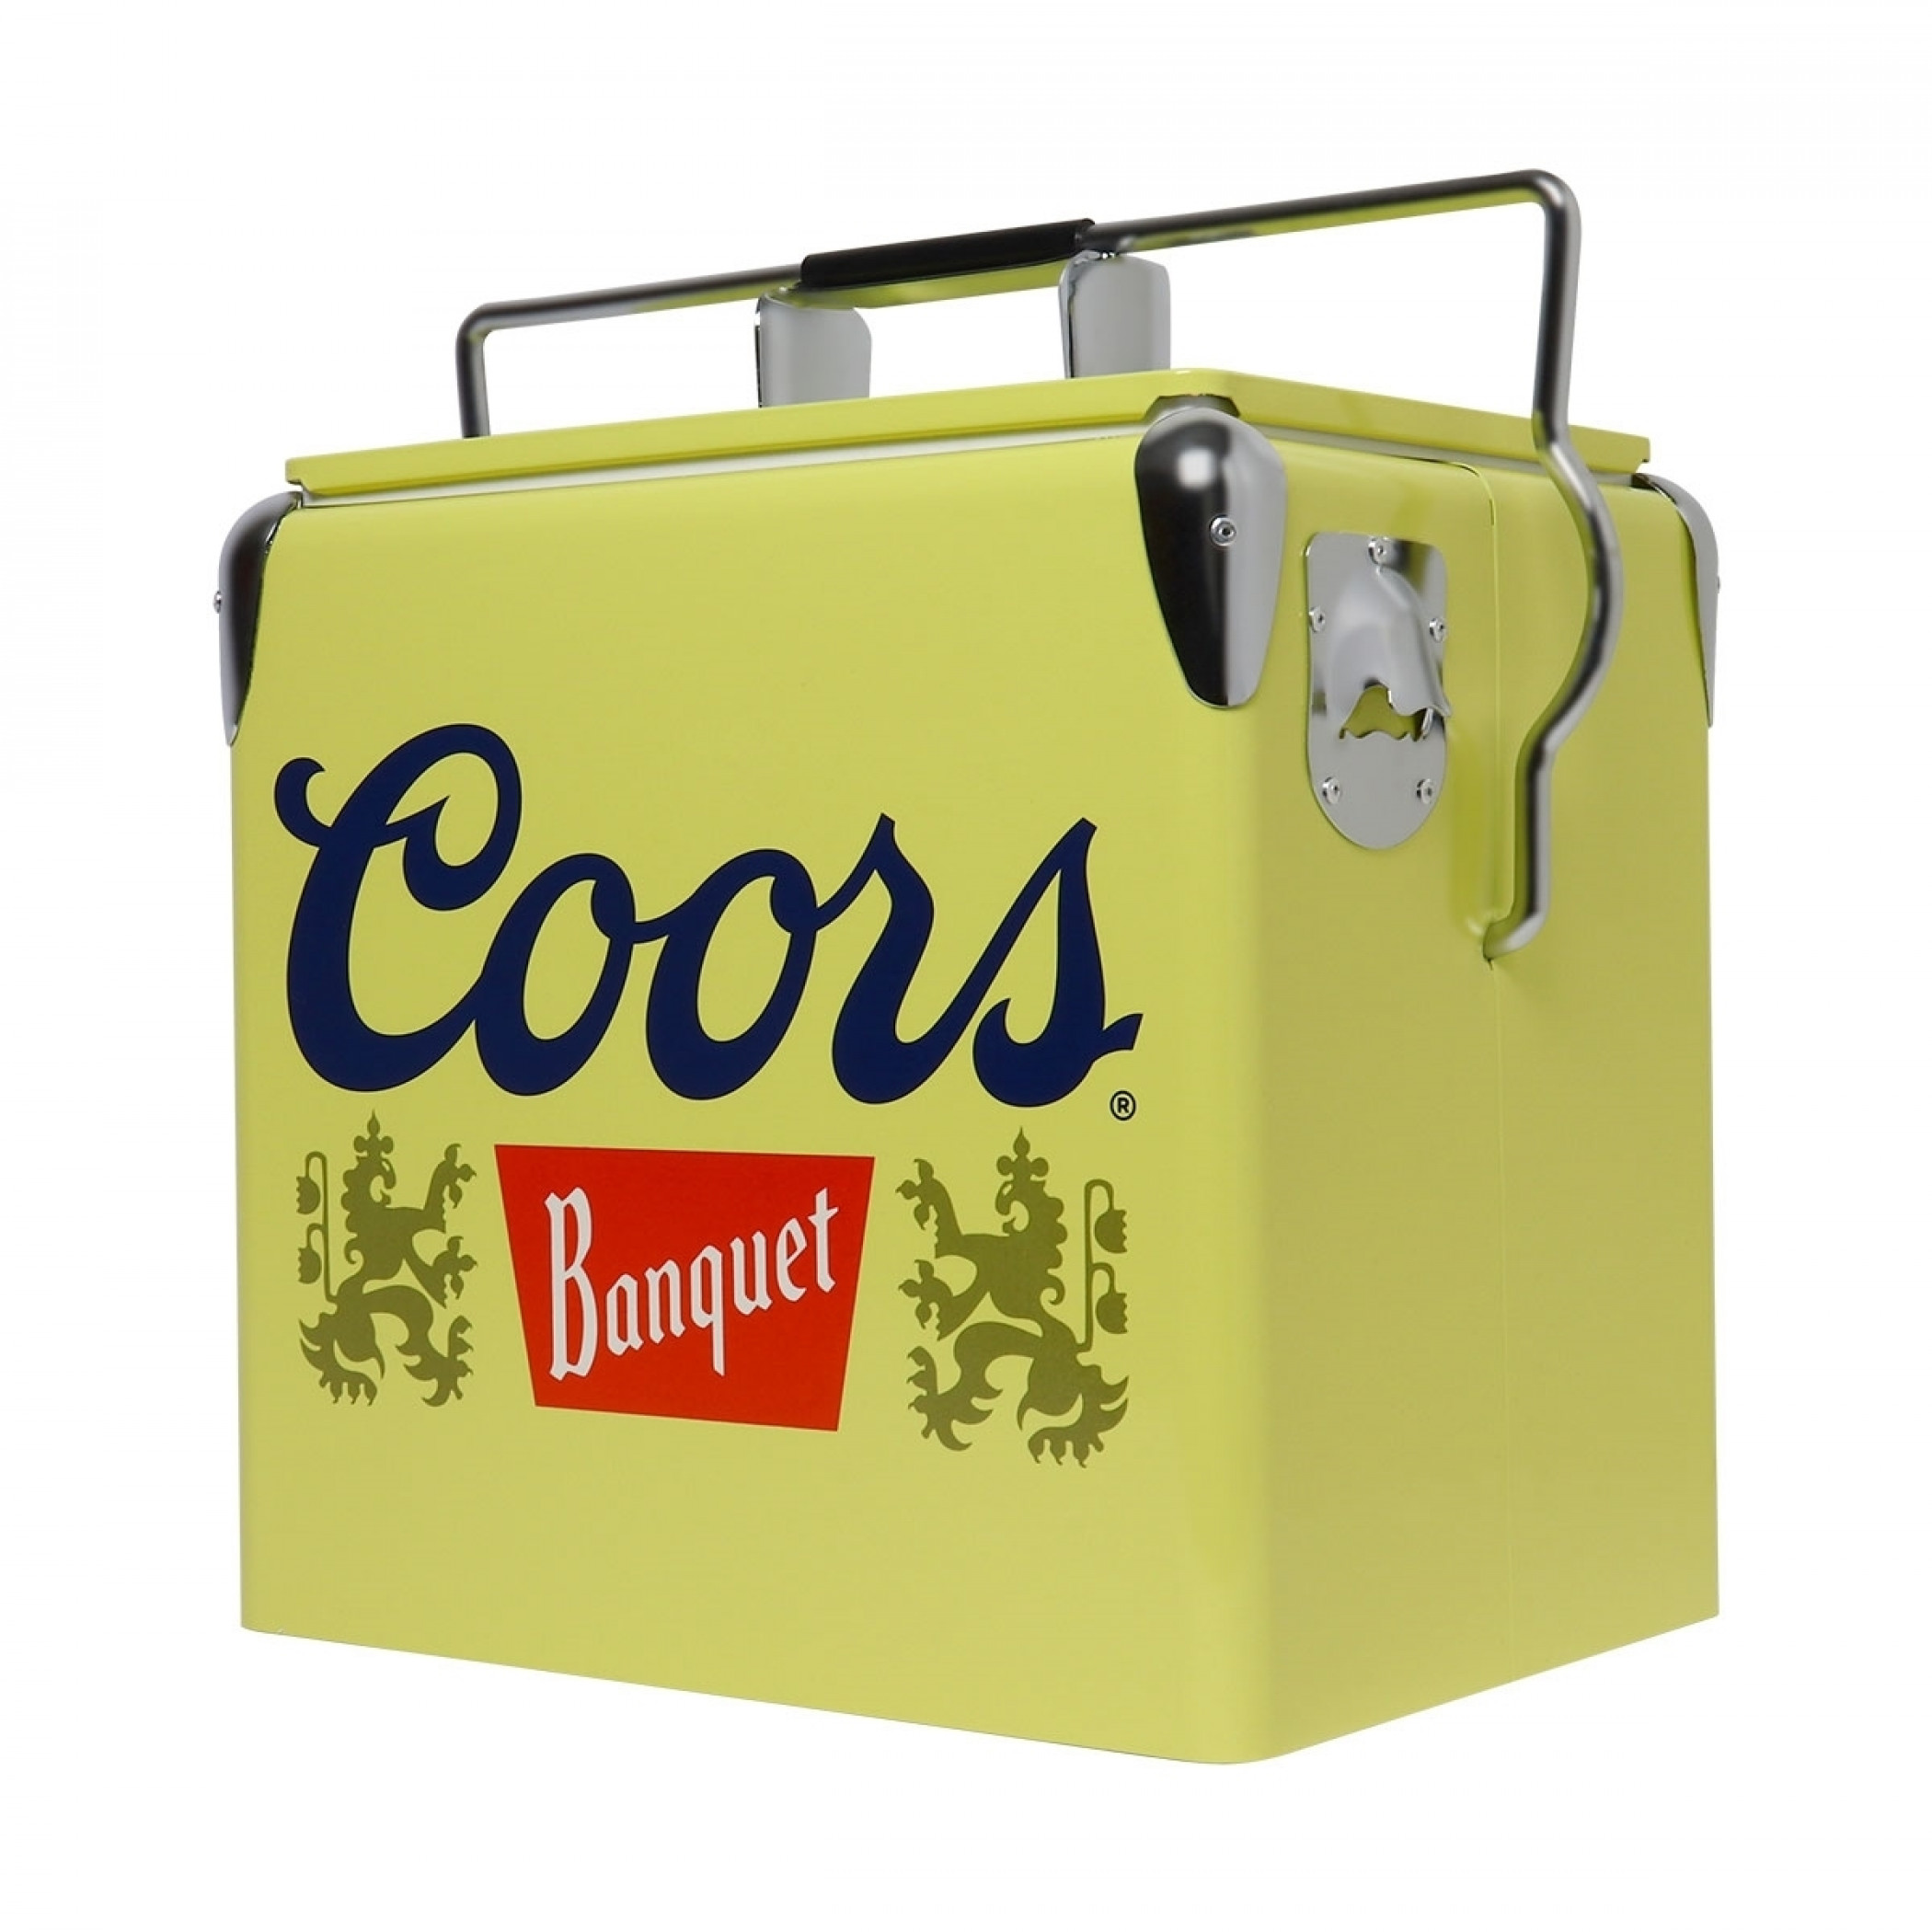 https://mmv2api.s3.us-east-2.amazonaws.com/products/images/0003841_coors-banquet-retro-ice-chest-cooler-with-bottle-opener-13l.jpeg